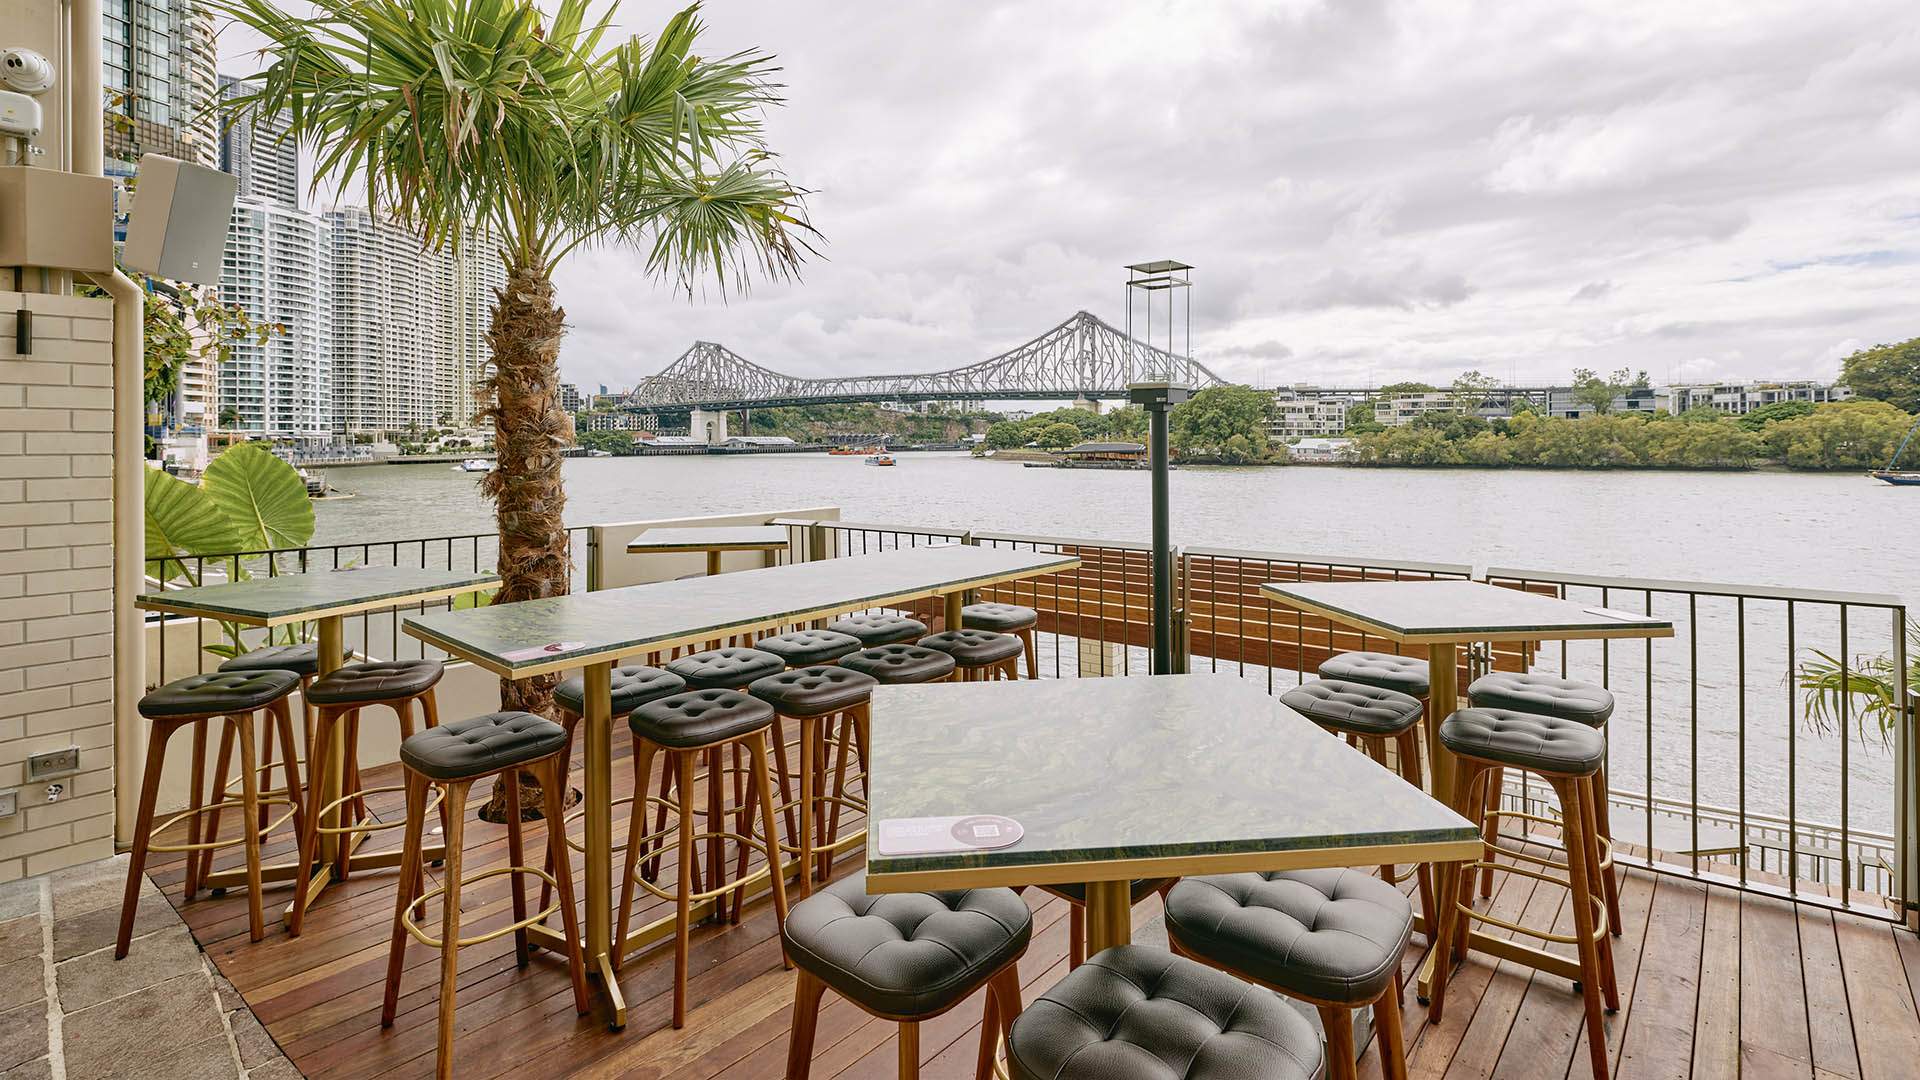 Now Open: Babylon Garden Is Eagle Street's New Two-Tier Waterfront Bar with Stunning River Views